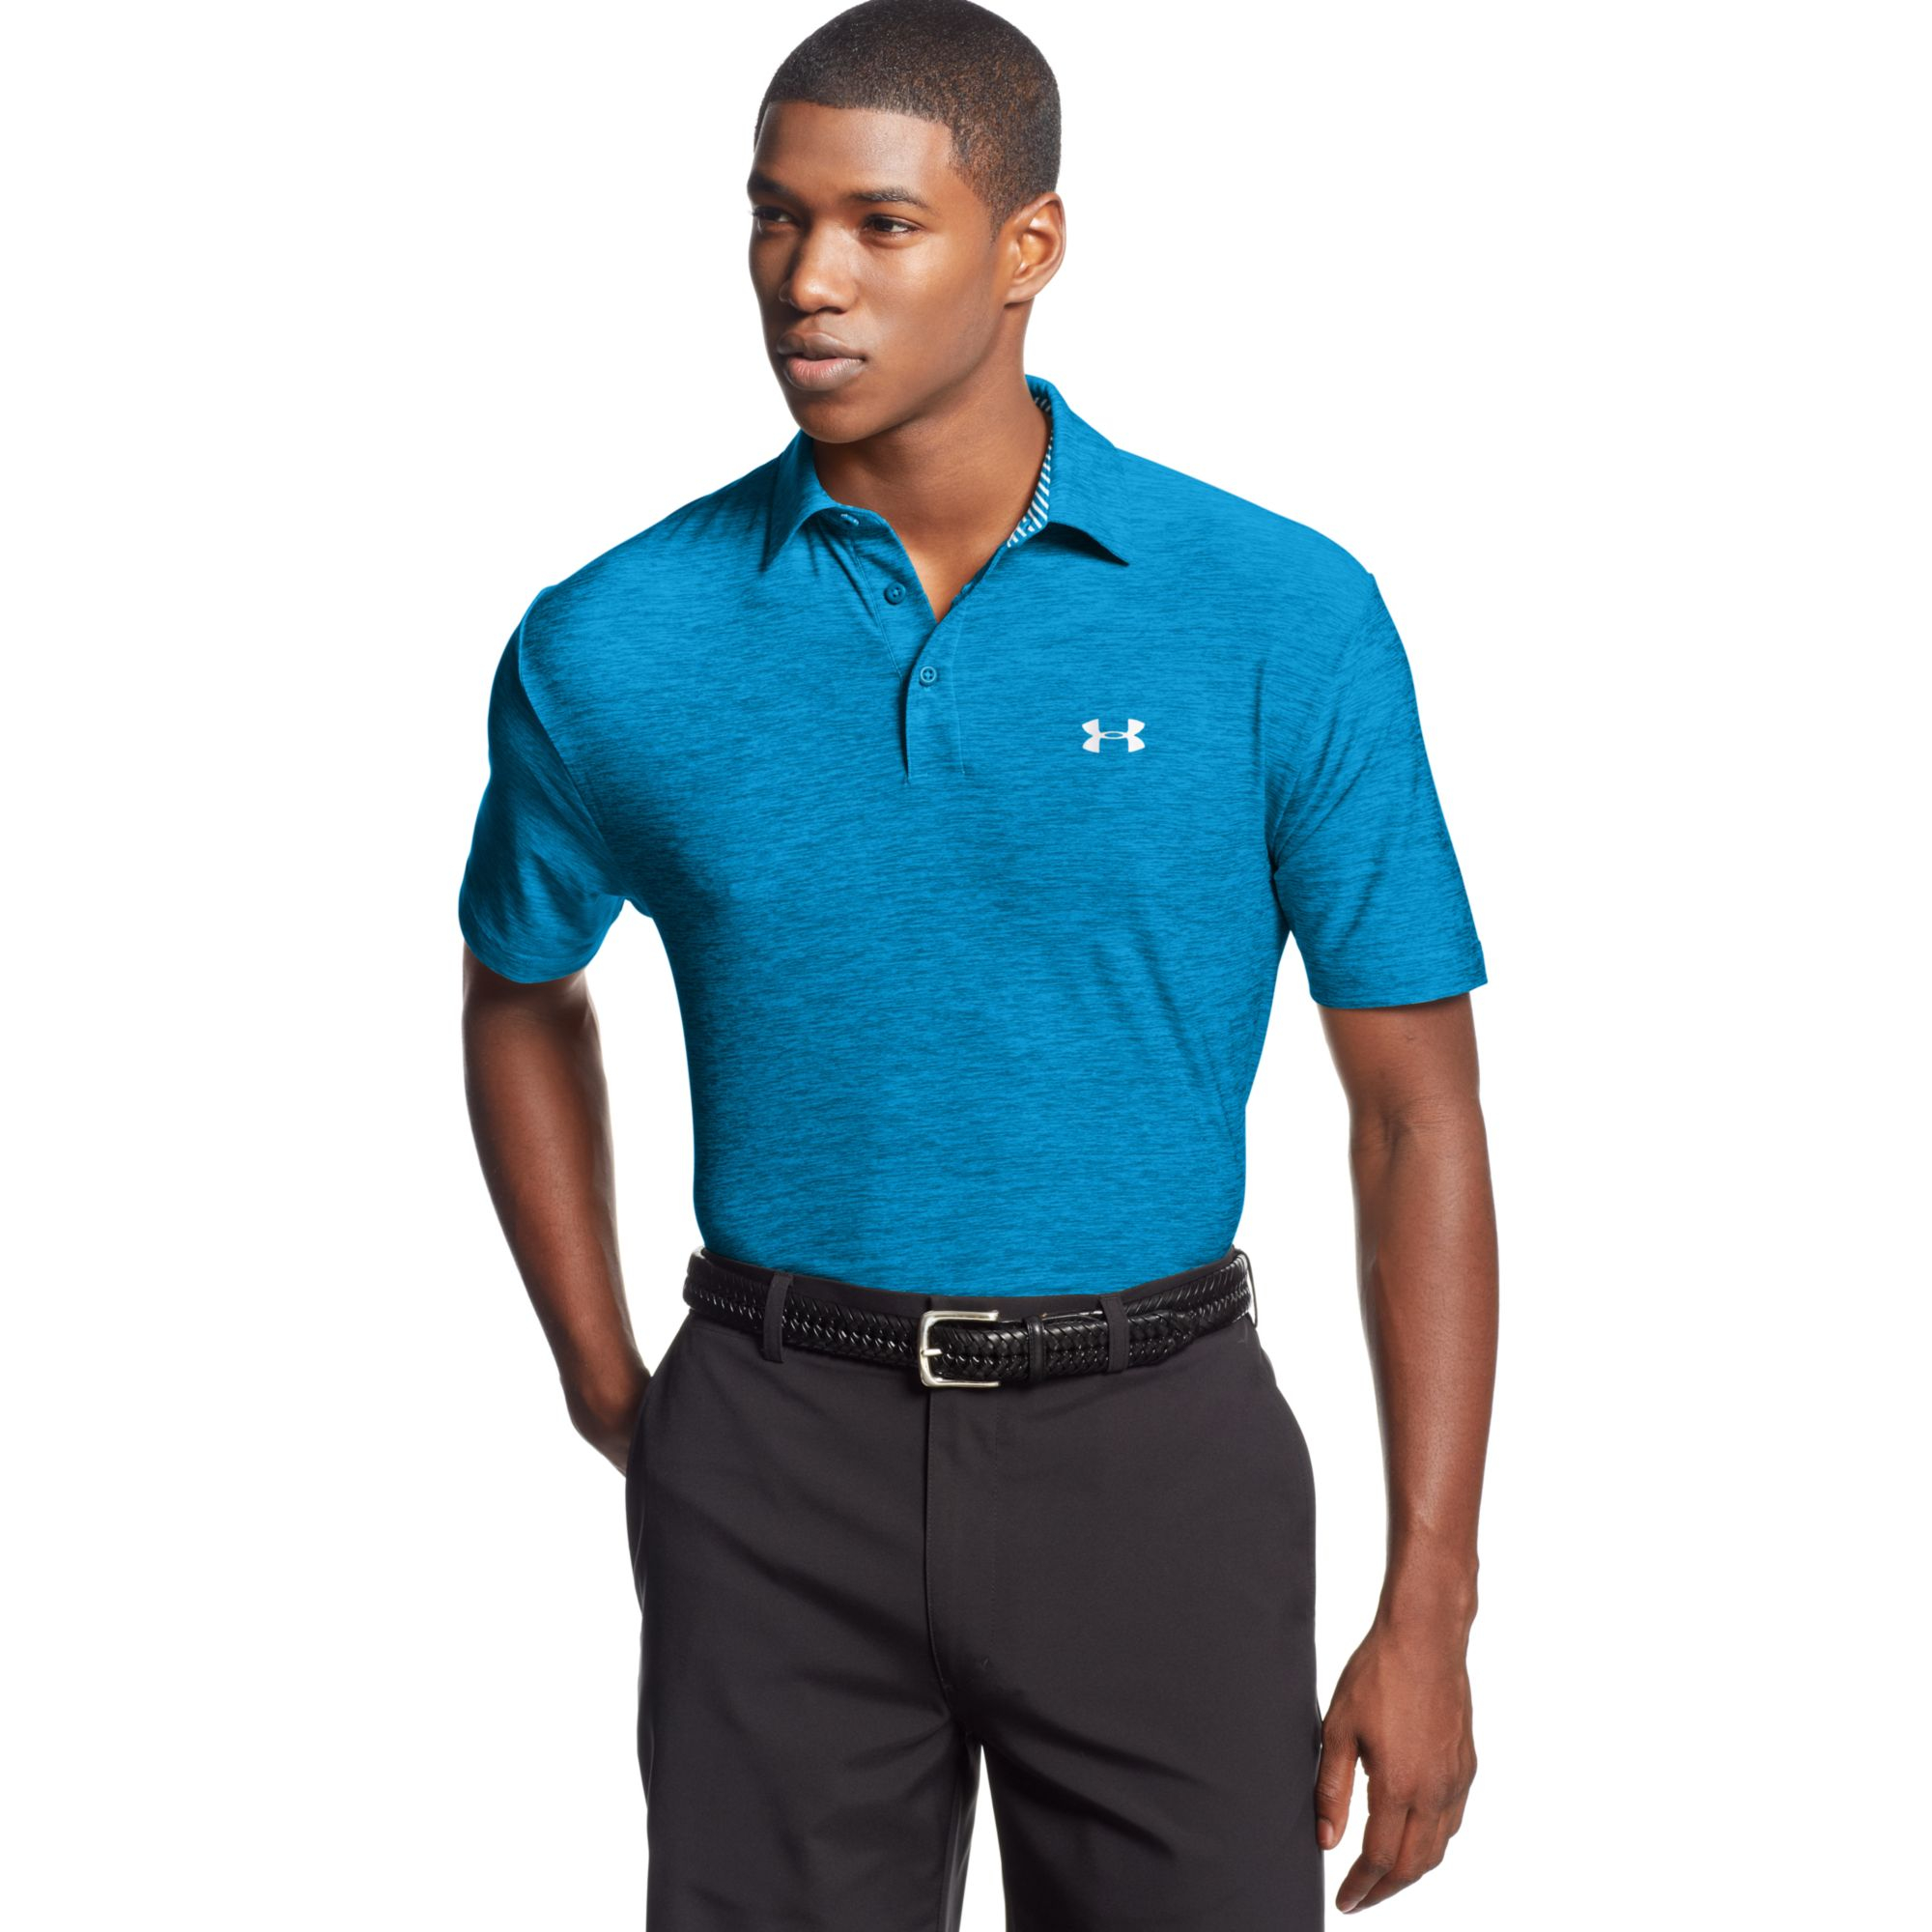 Lyst - Under Armour Elevated Heather Performance Golf Polo in Blue for Men